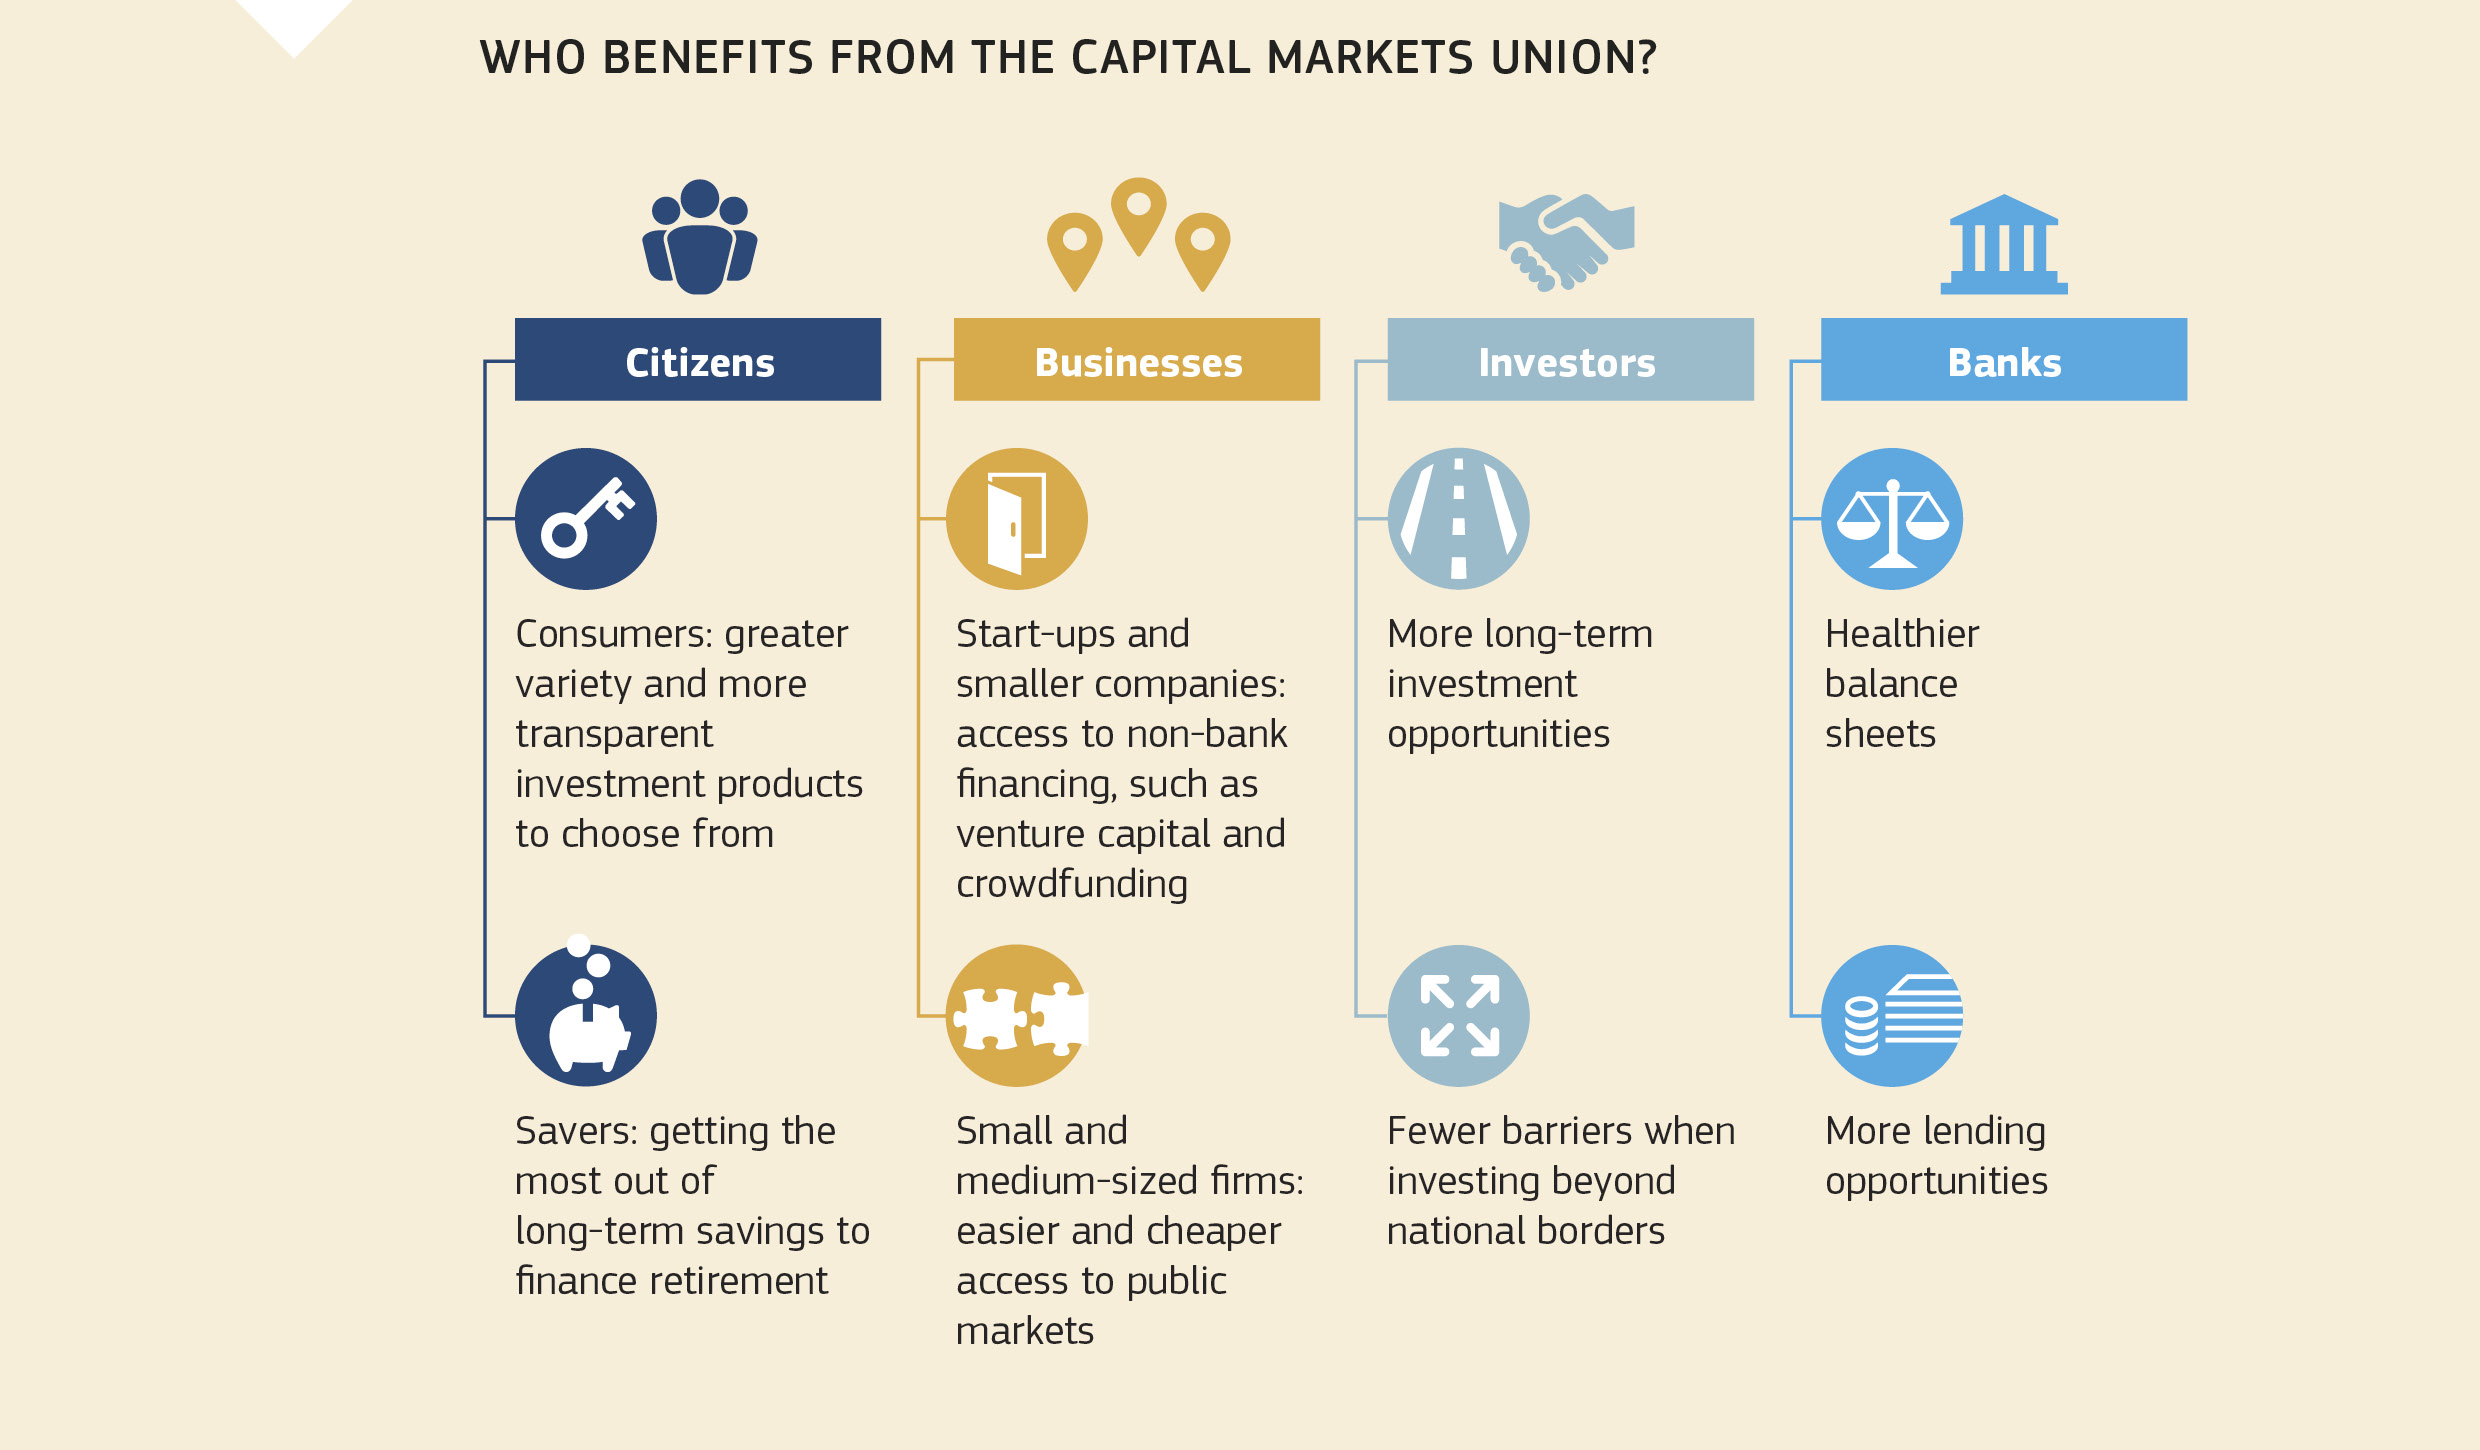 WHO BENEFITS FROM THE CAPITAL MARKETS UNION?